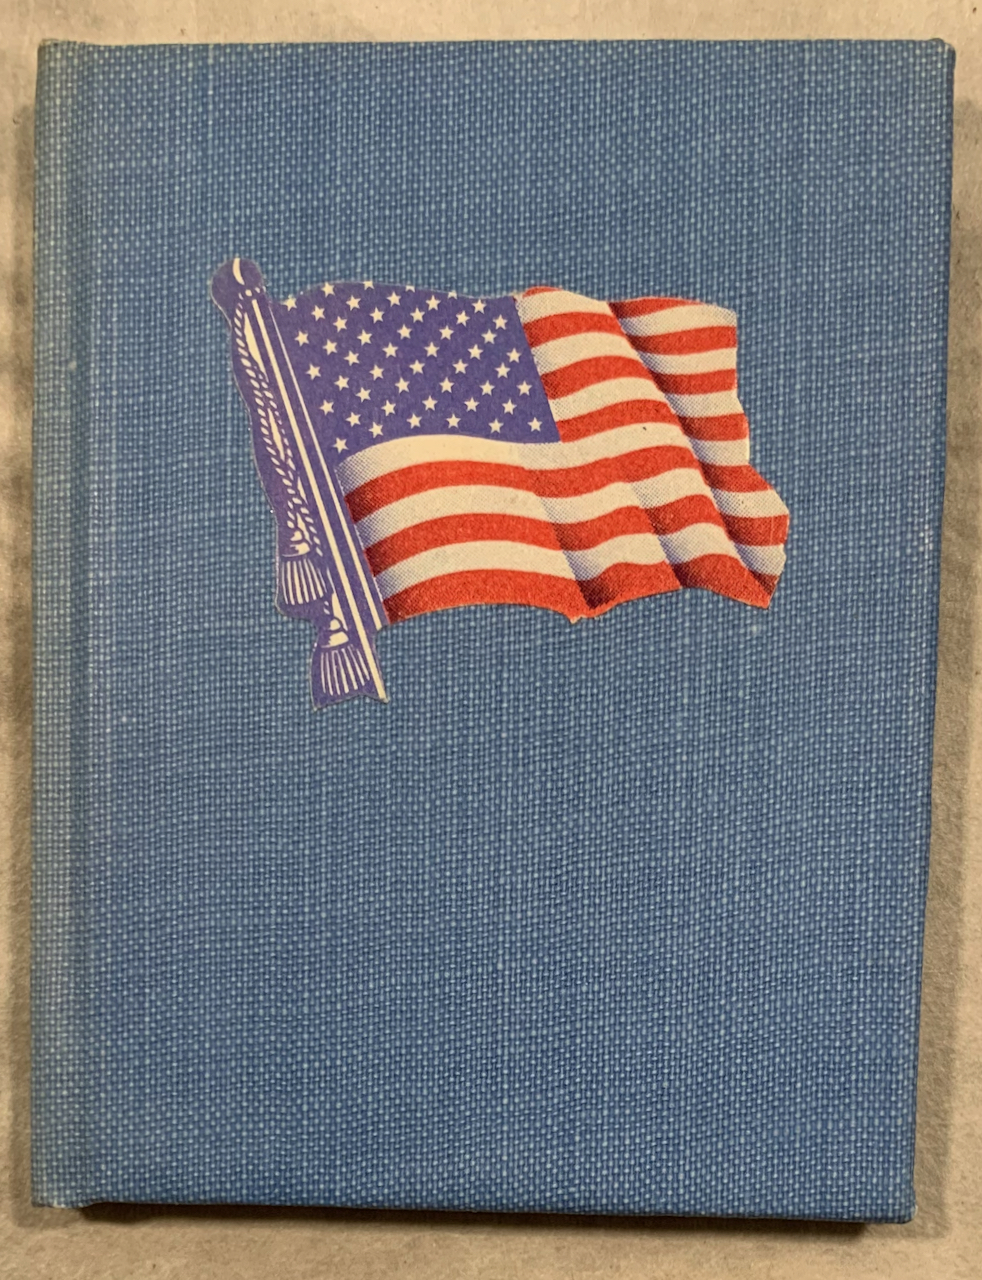 Ragged Old Flag. With the Story of Old Glory